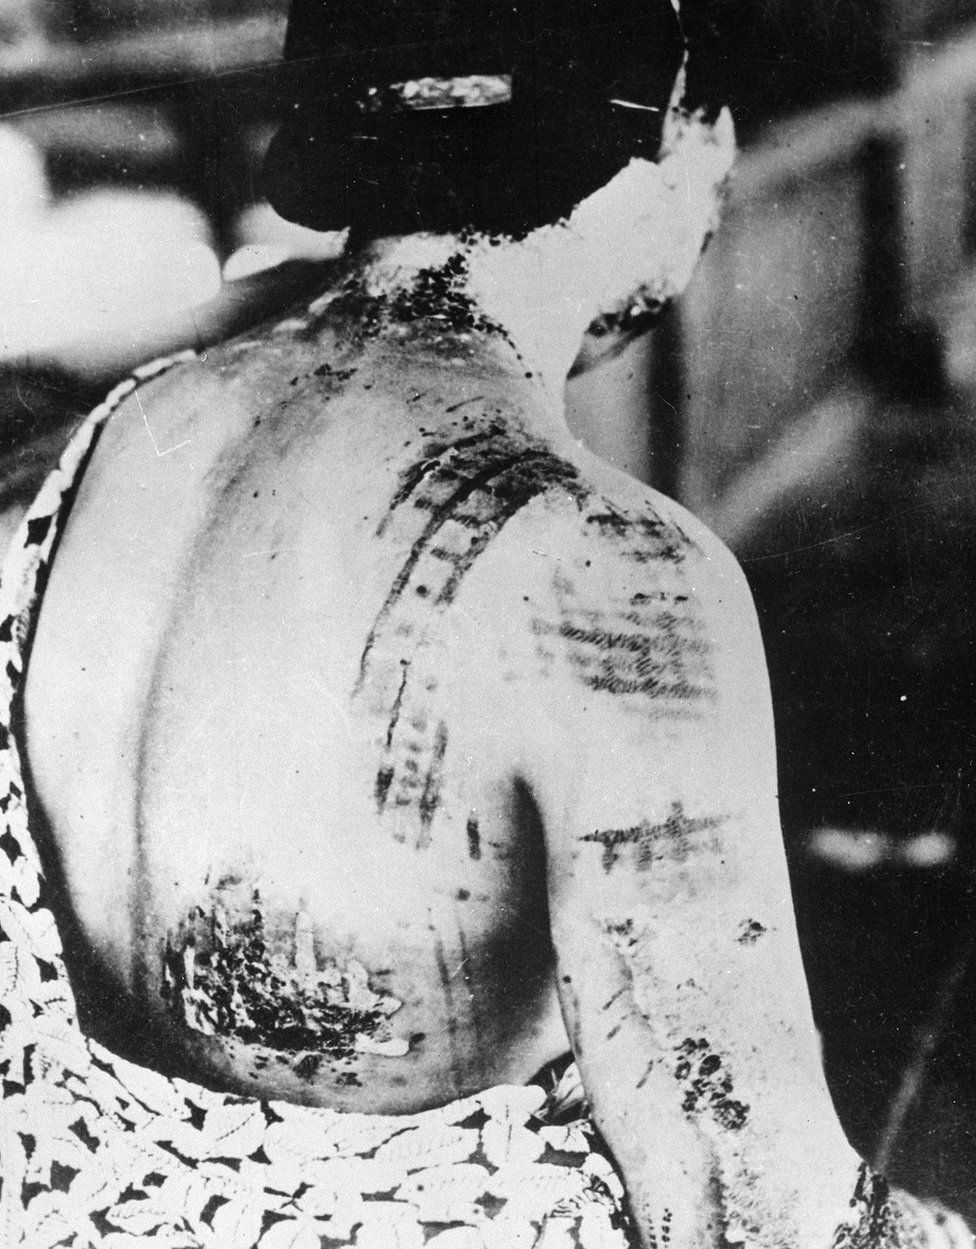 The patient's skin is burned in a pattern corresponding to the dark portions of a kimono worn at the time of the explosion